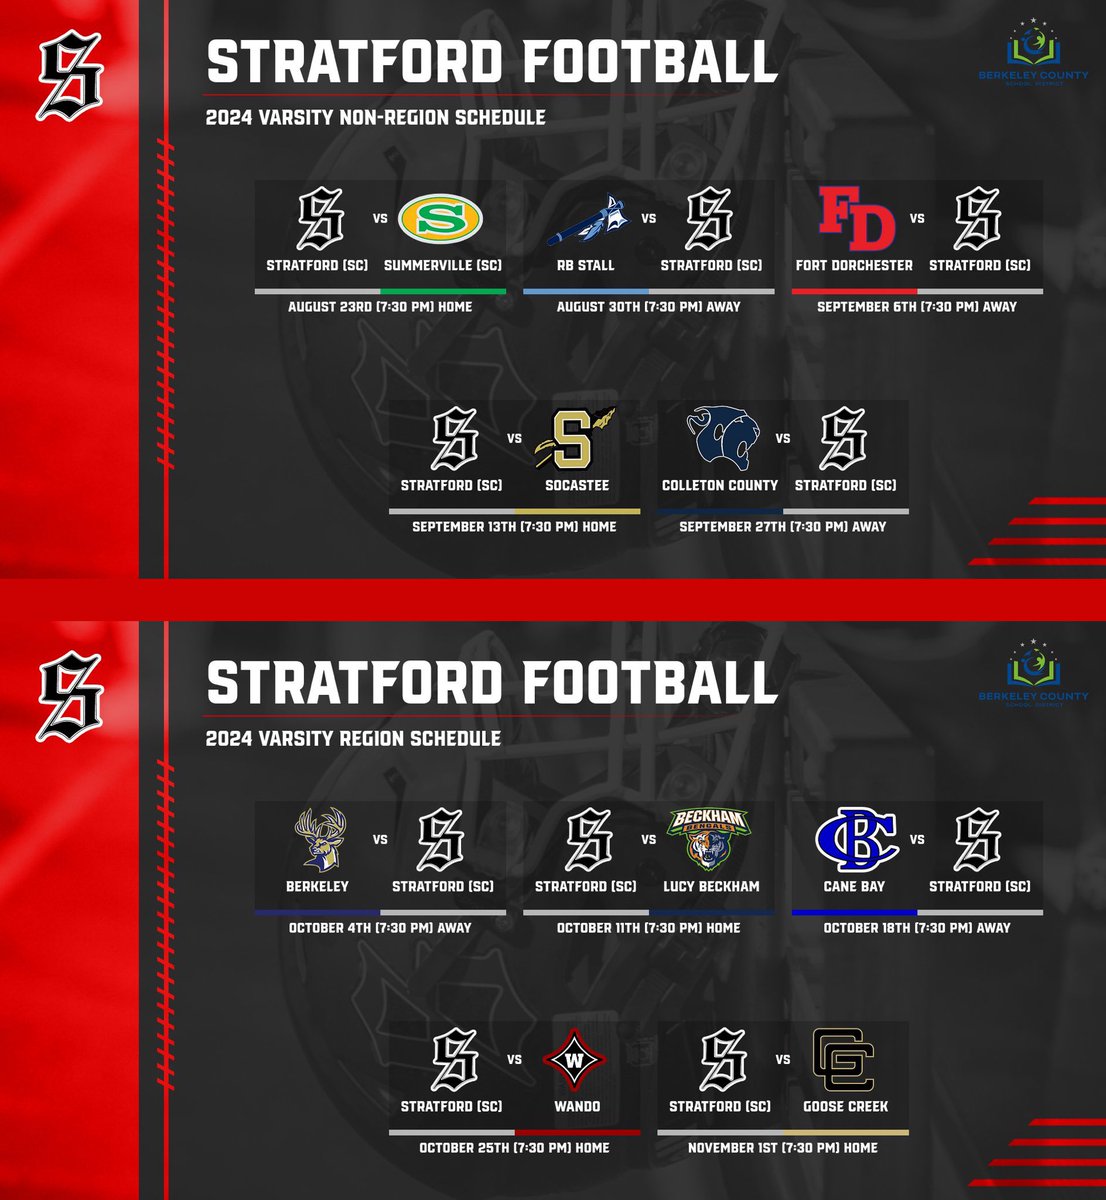 Our 2024 football schedule! #ExpectToWin